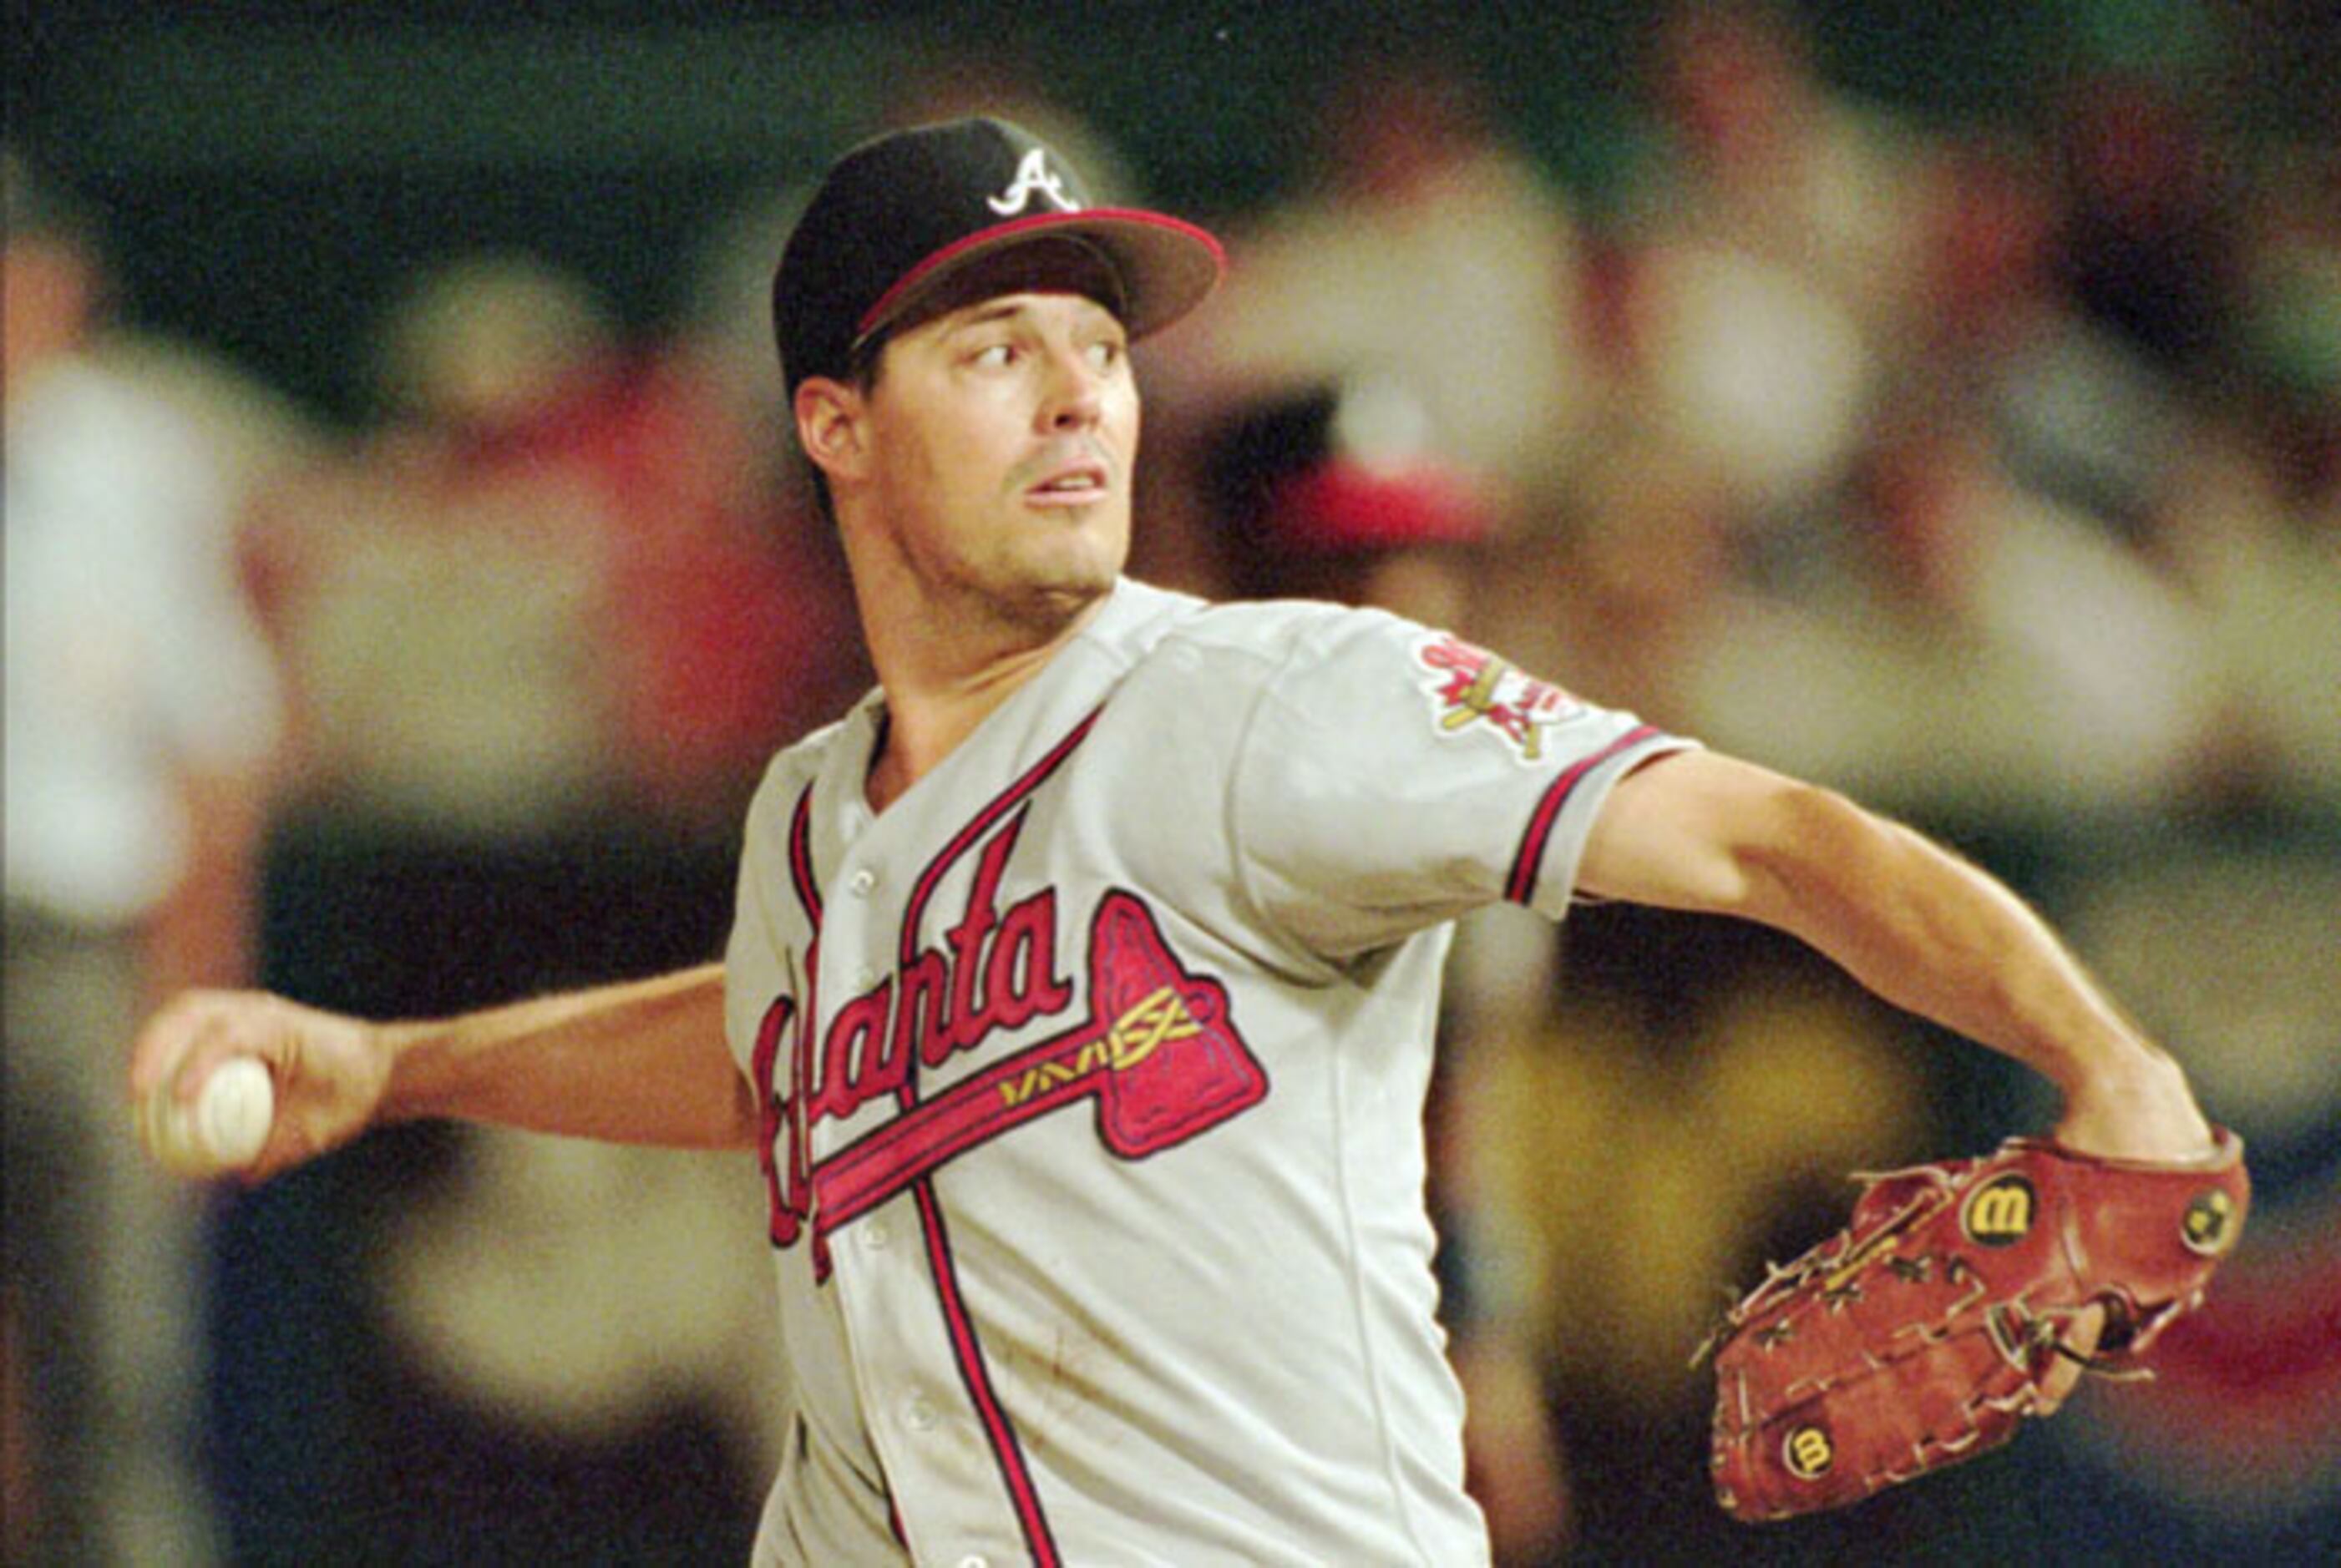 Rangers expected to add ex-star pitcher Greg Maddux to front office